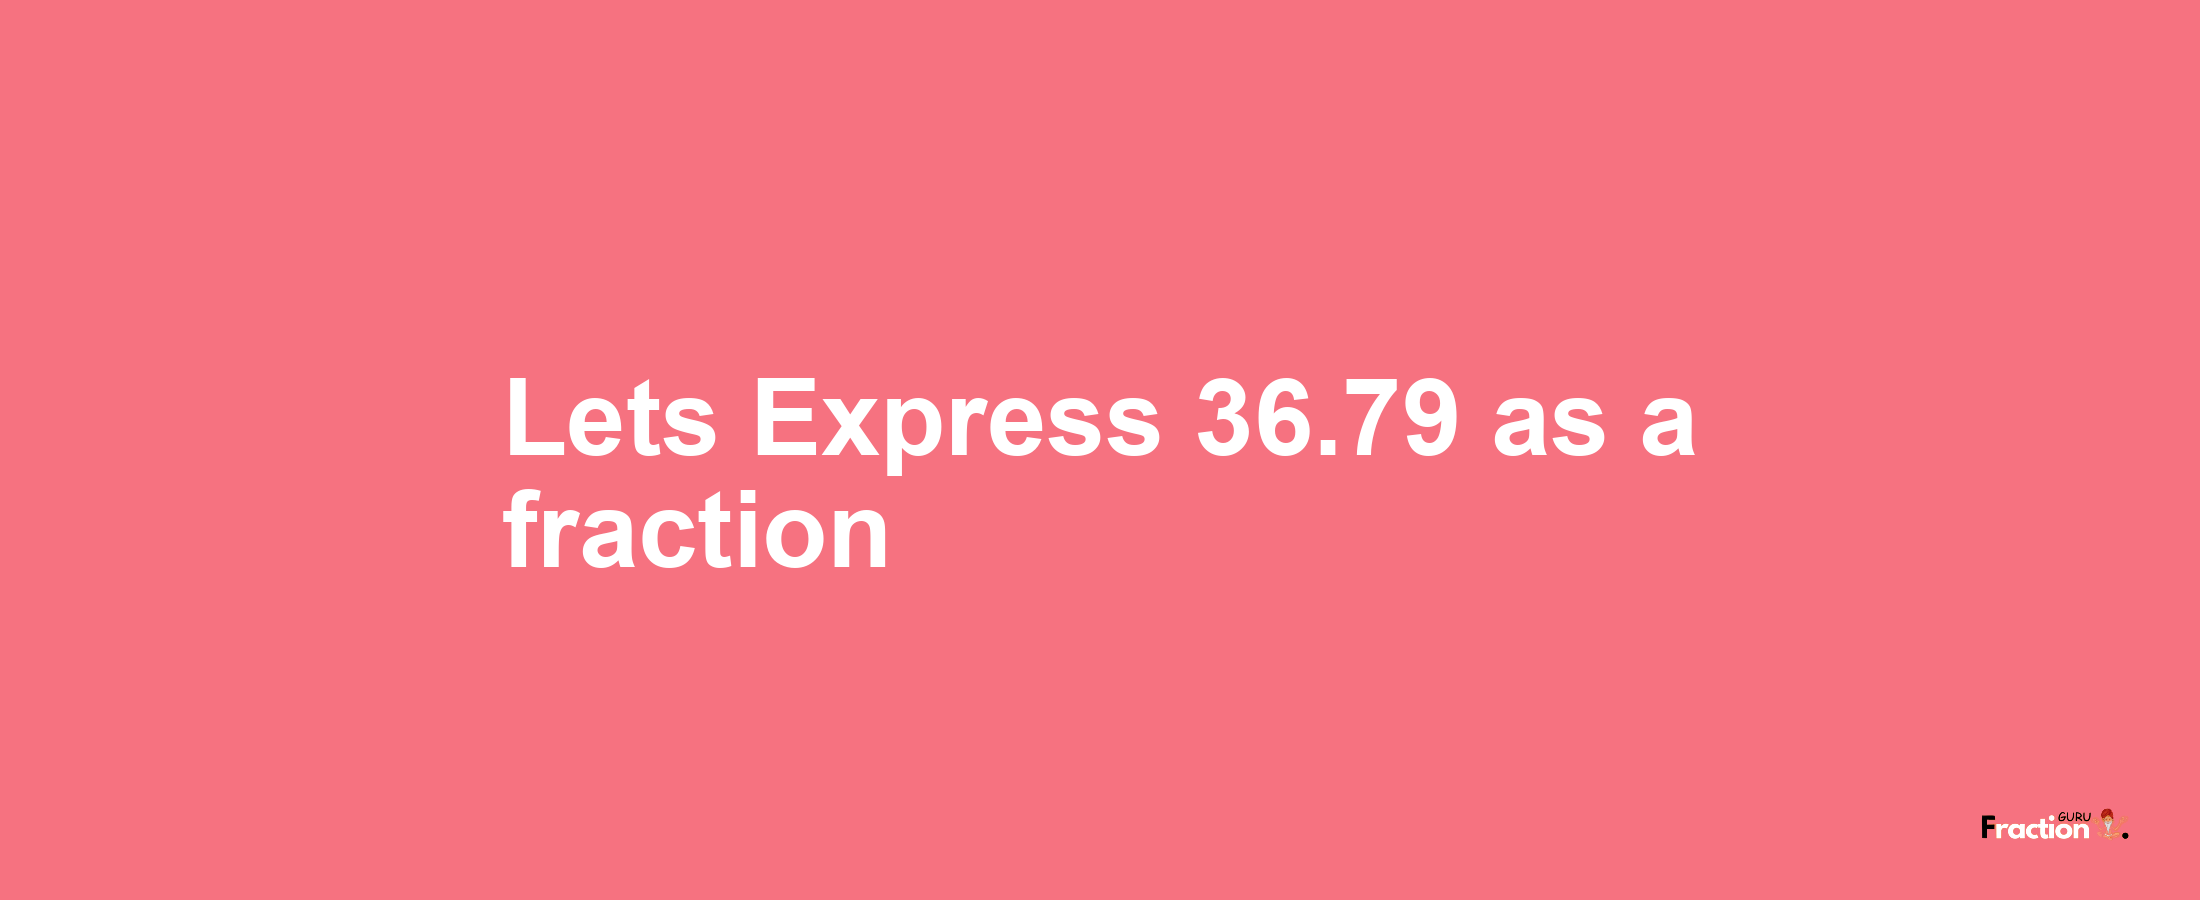 Lets Express 36.79 as afraction